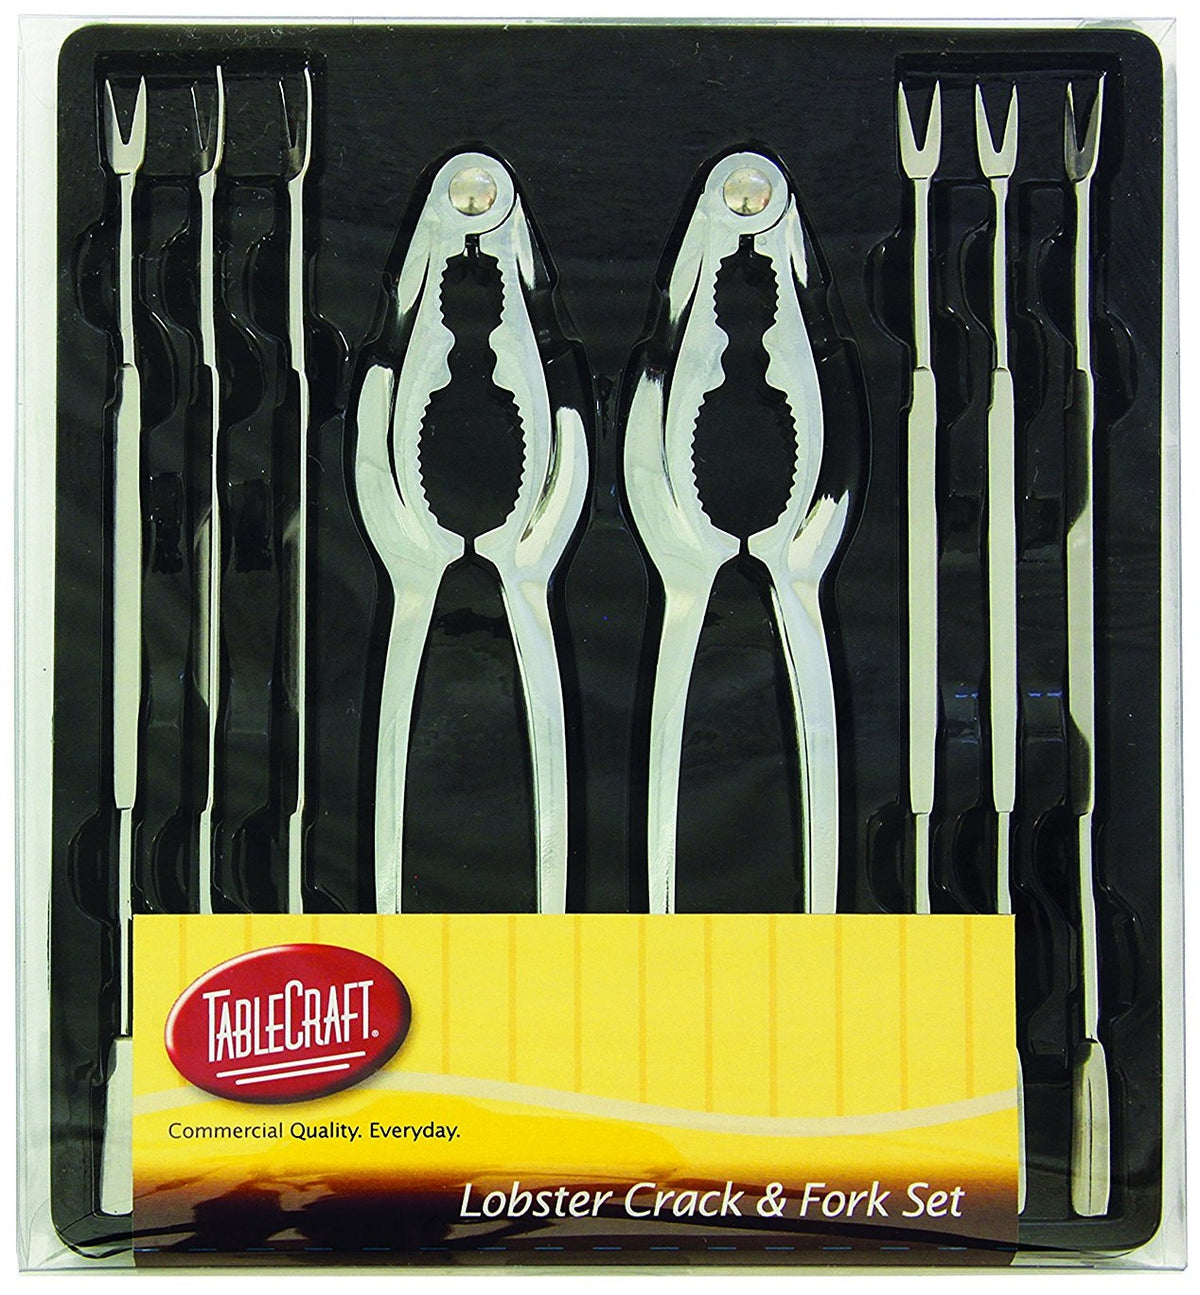 buy specialty cutlery at cheap rate in bulk. wholesale & retail kitchen accessories & materials store.